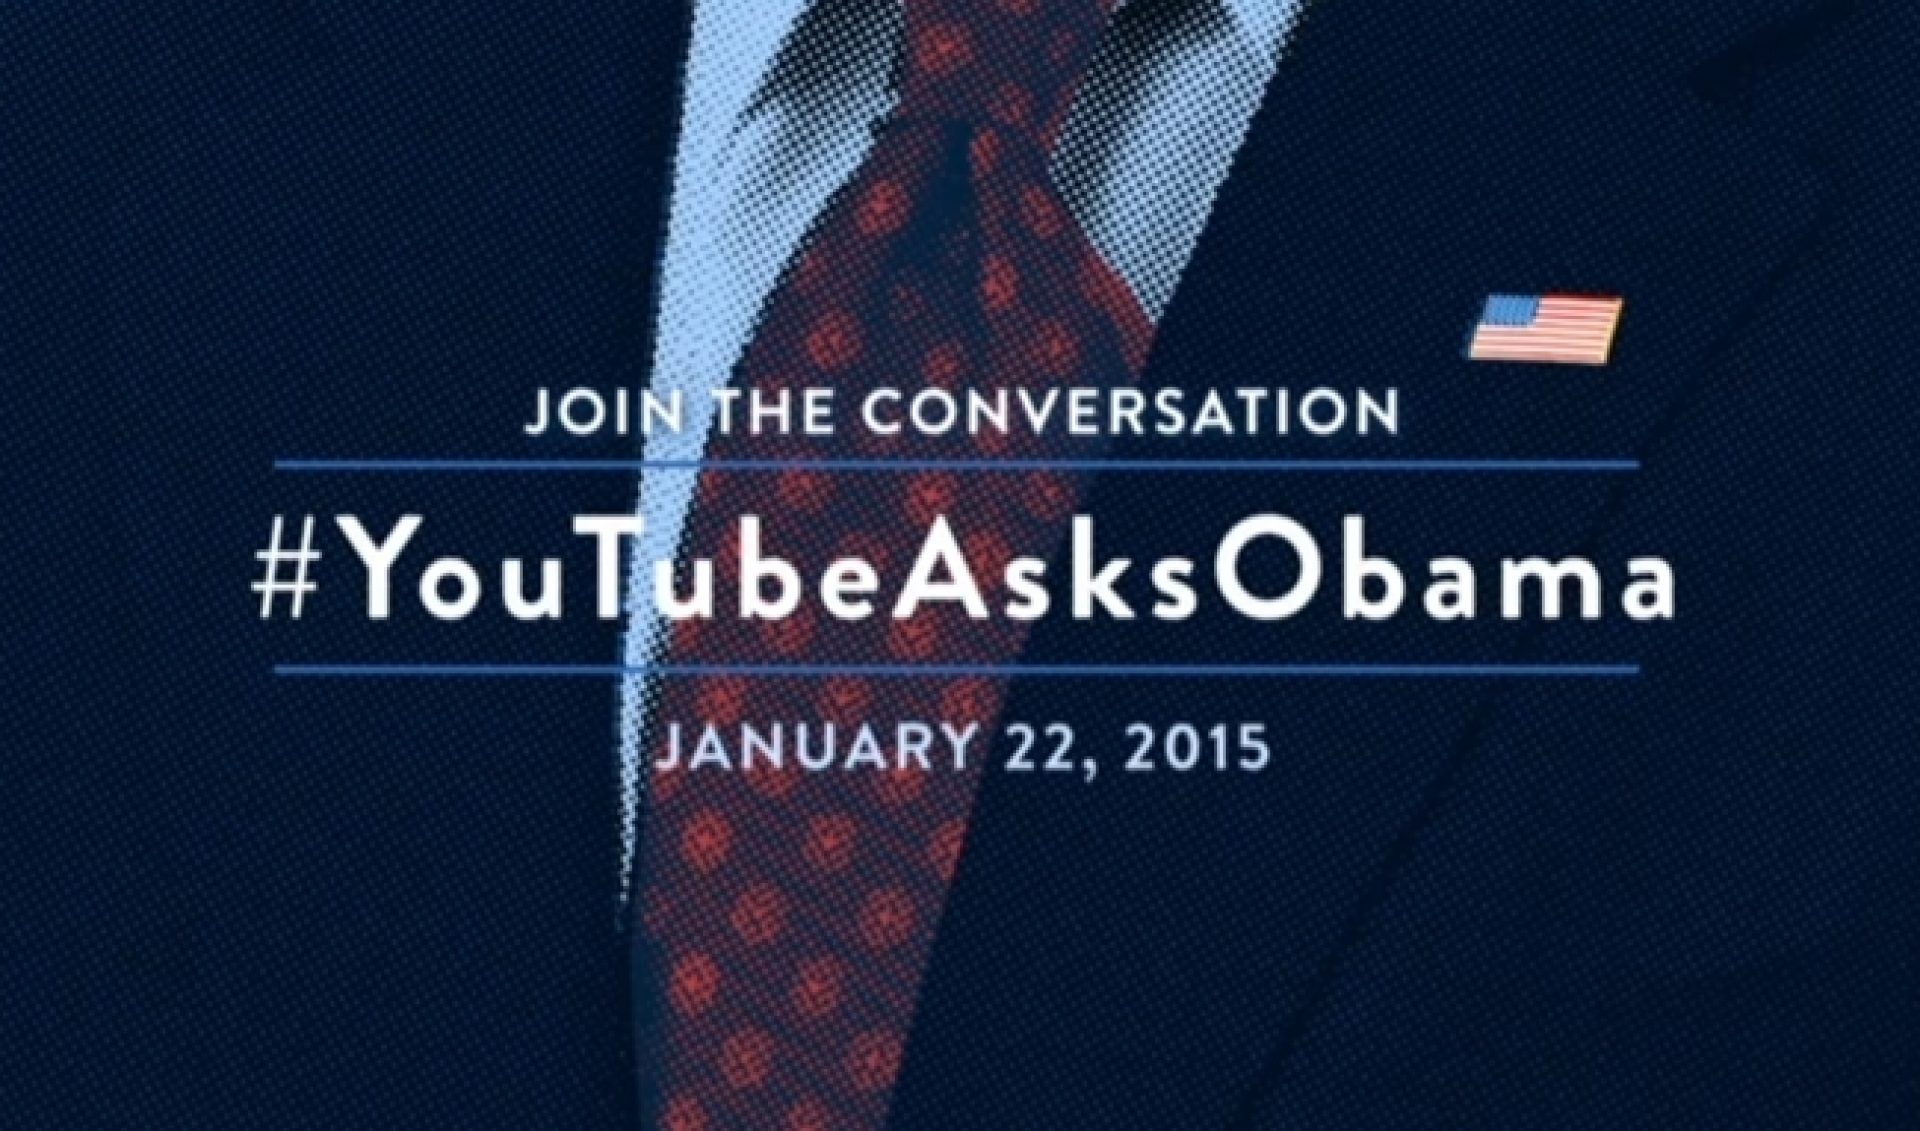 Here’s The Live Stream For YouTube’s Interview With President Obama